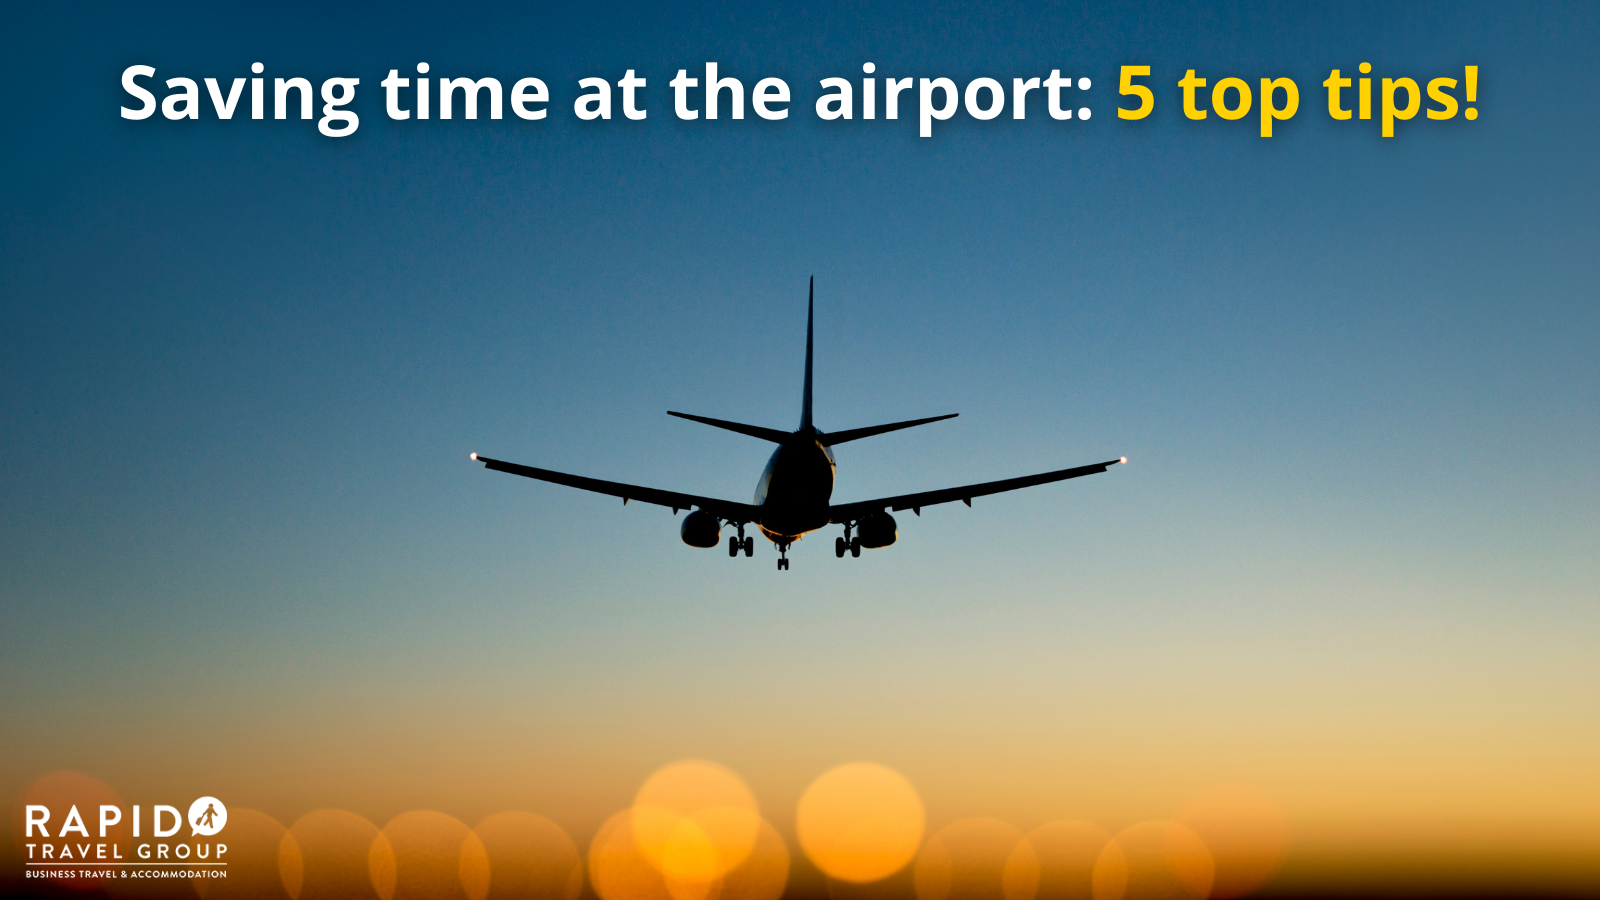 A plane has just taken off from an airport runway. Saving time at the airport: 5 top tips! is written above.